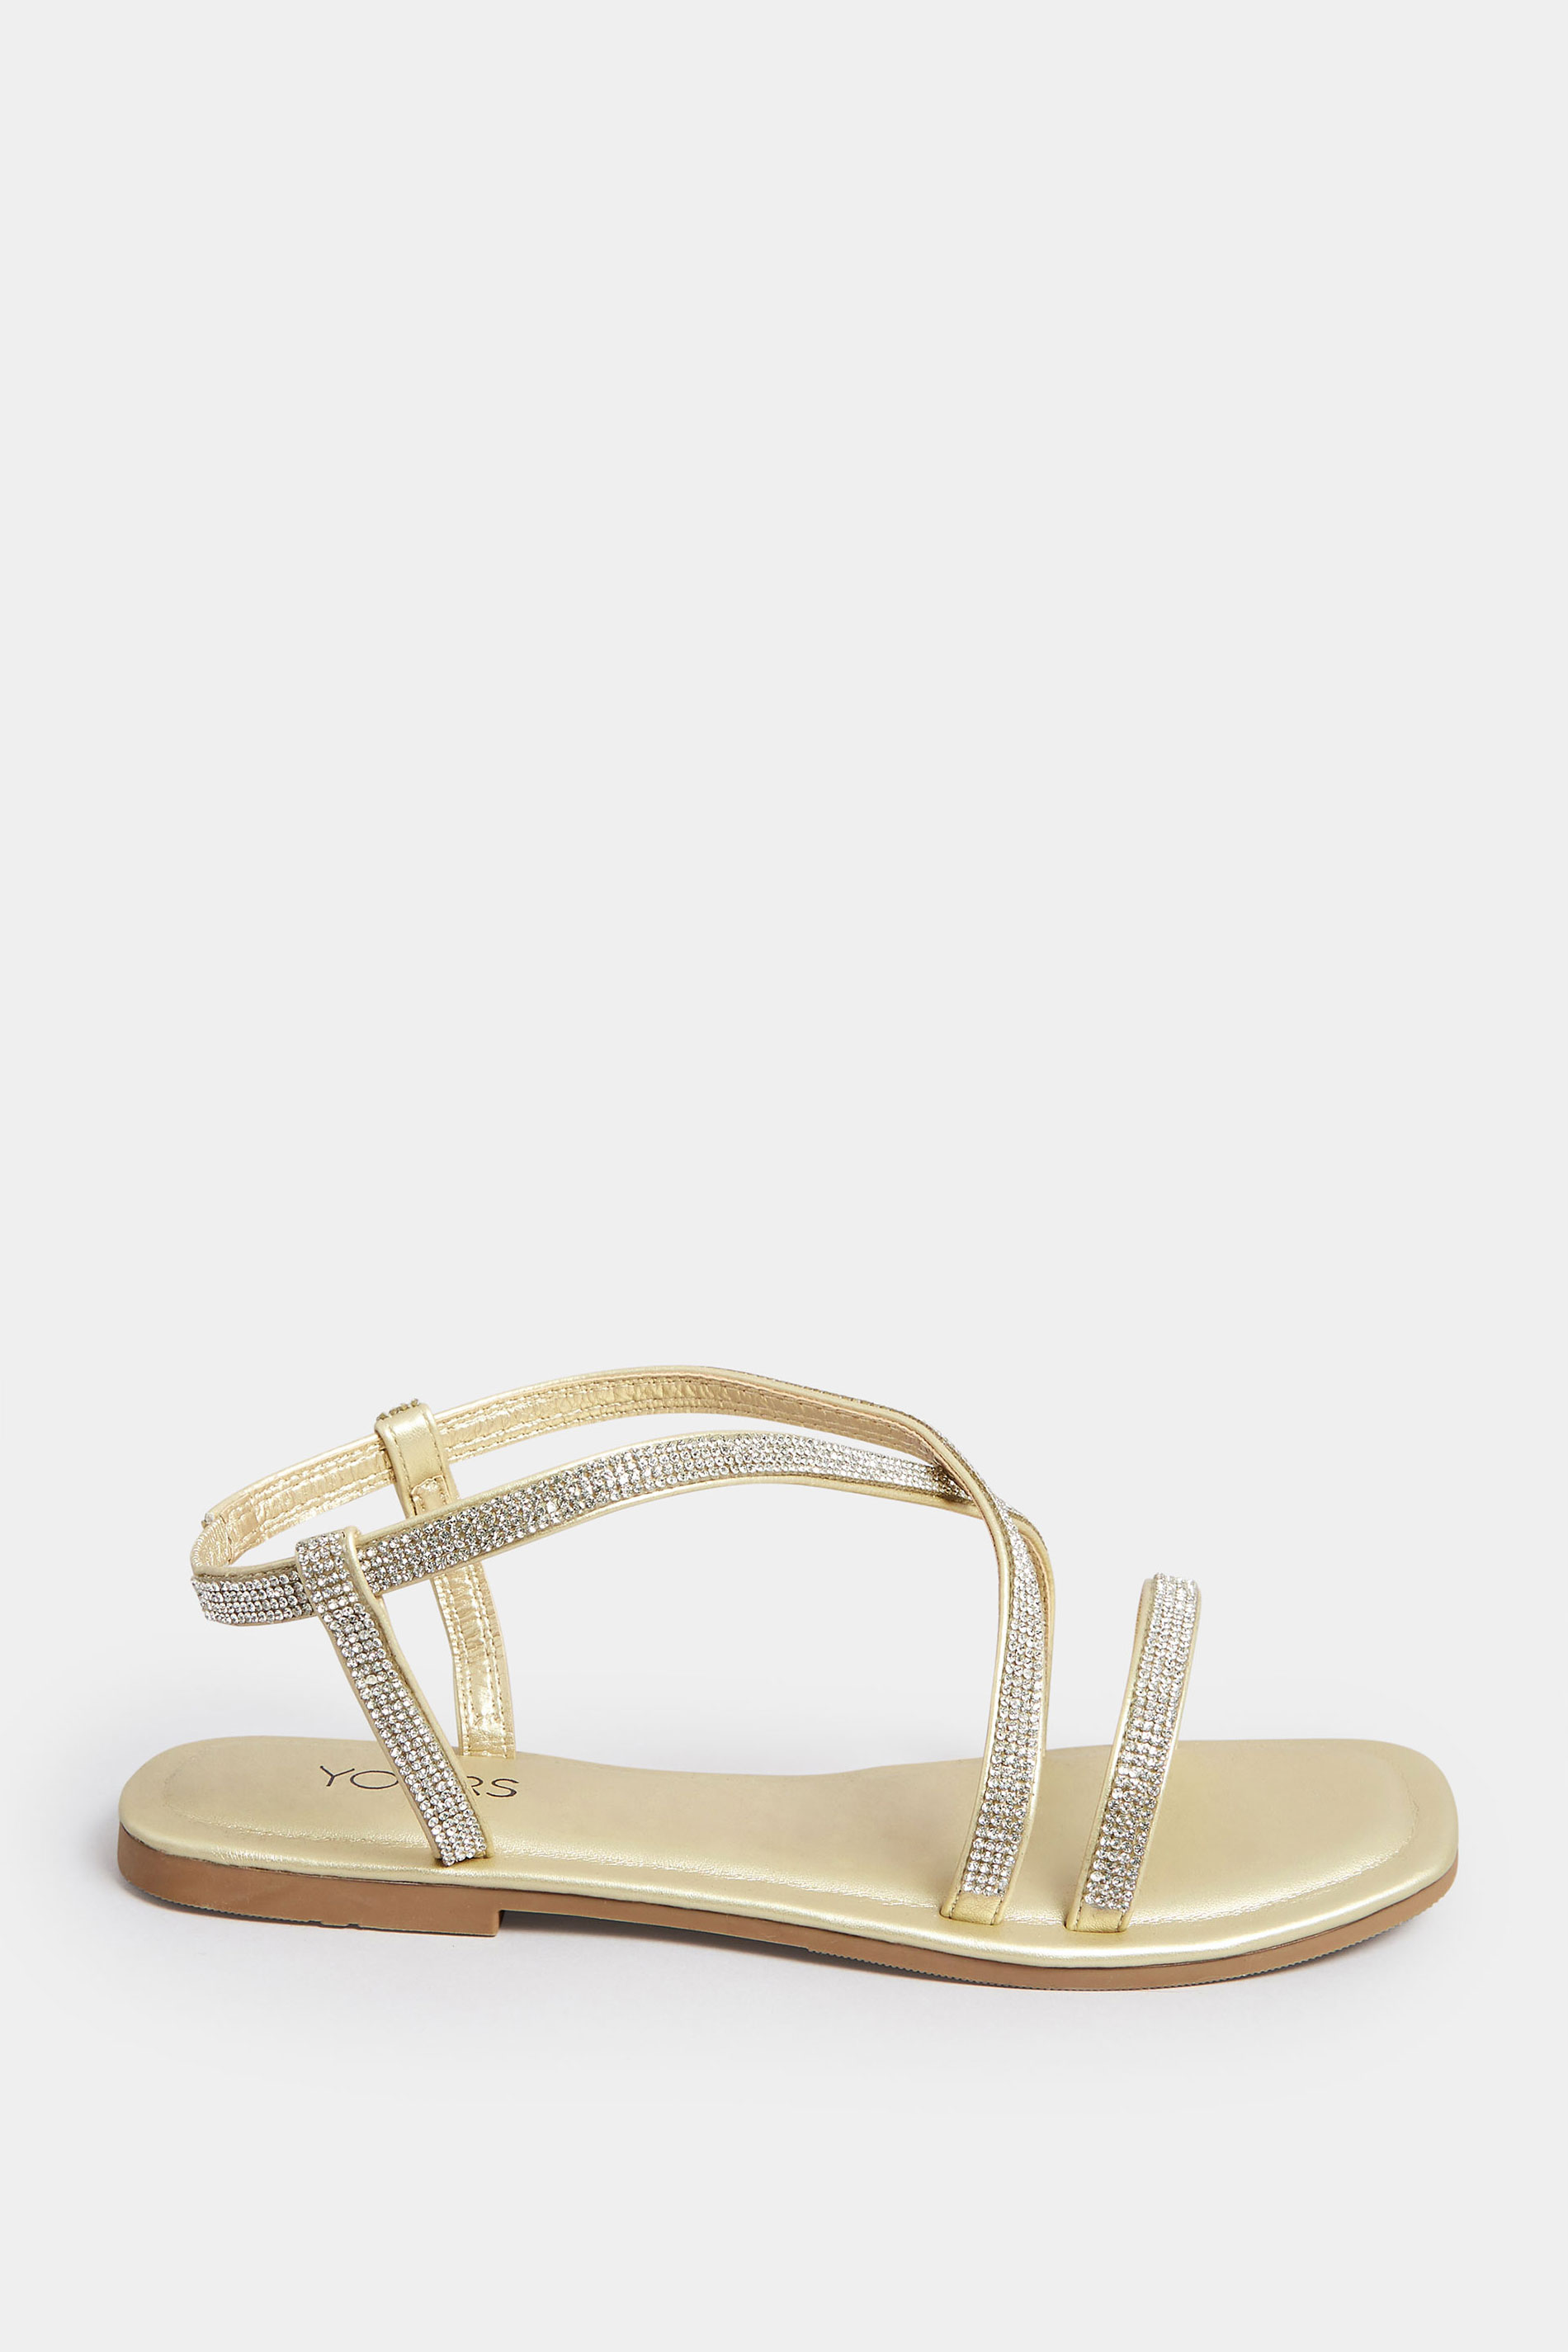 Yours Curve Women's Two Strap Sandals